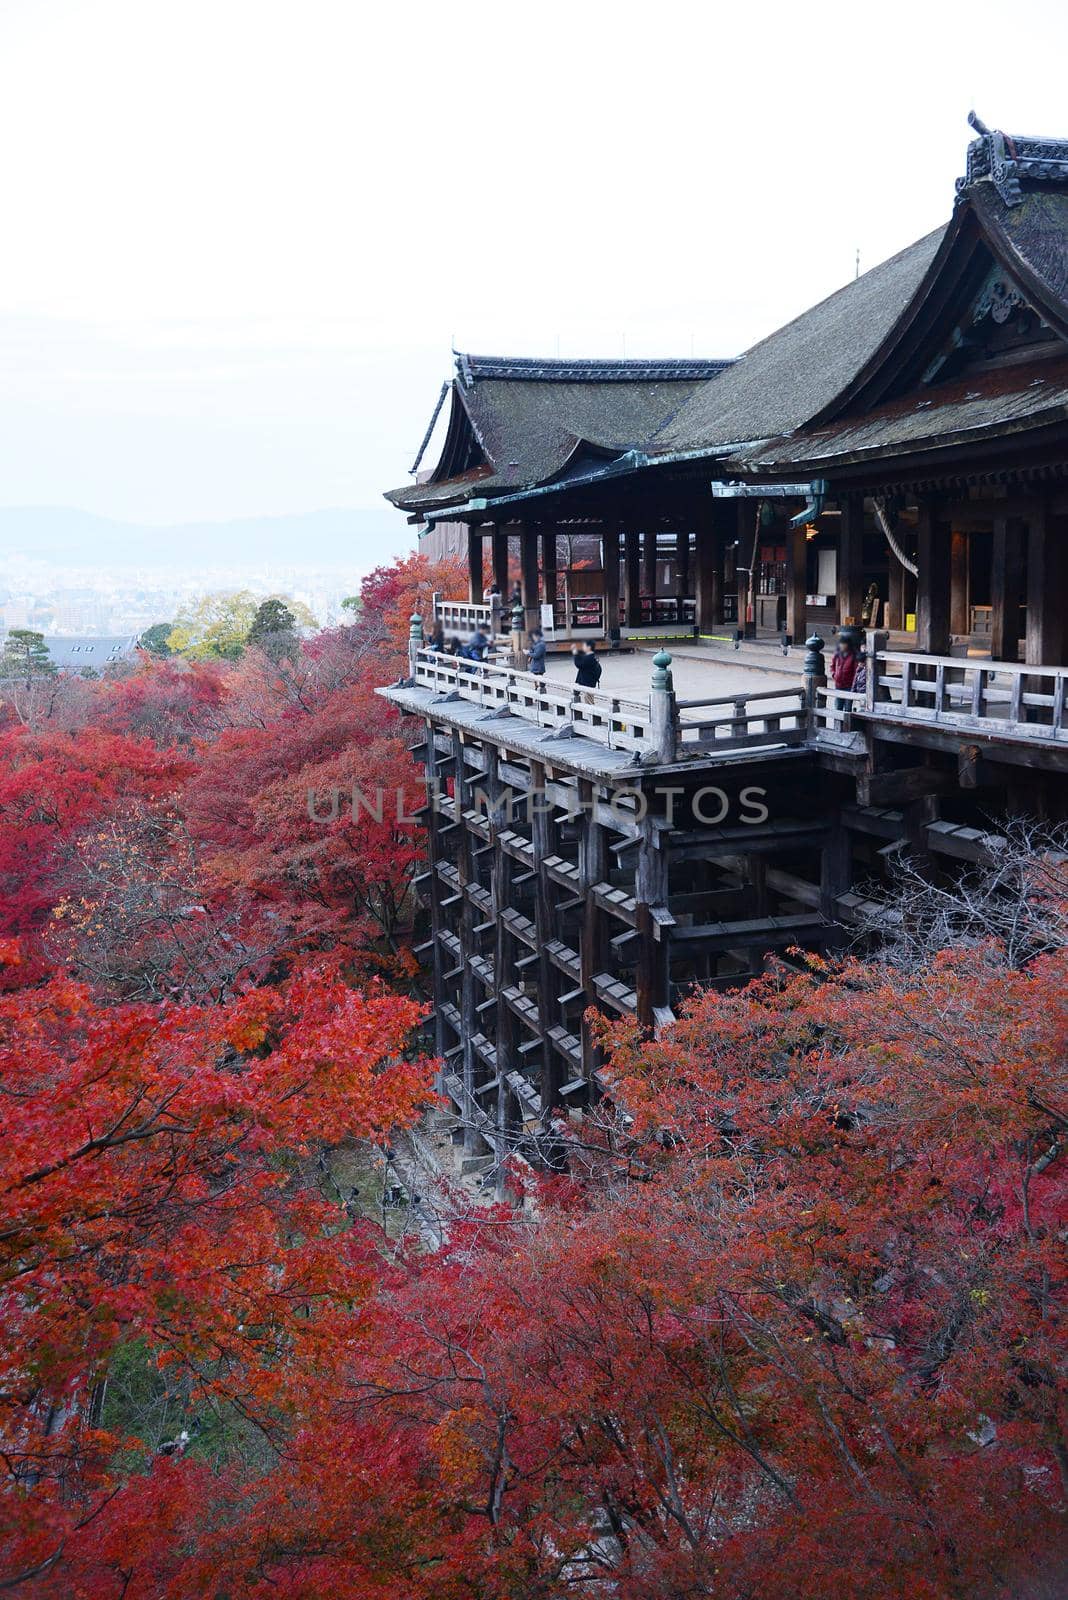 red leaves of fall foliage in a wooden temple on a hill in kyoto